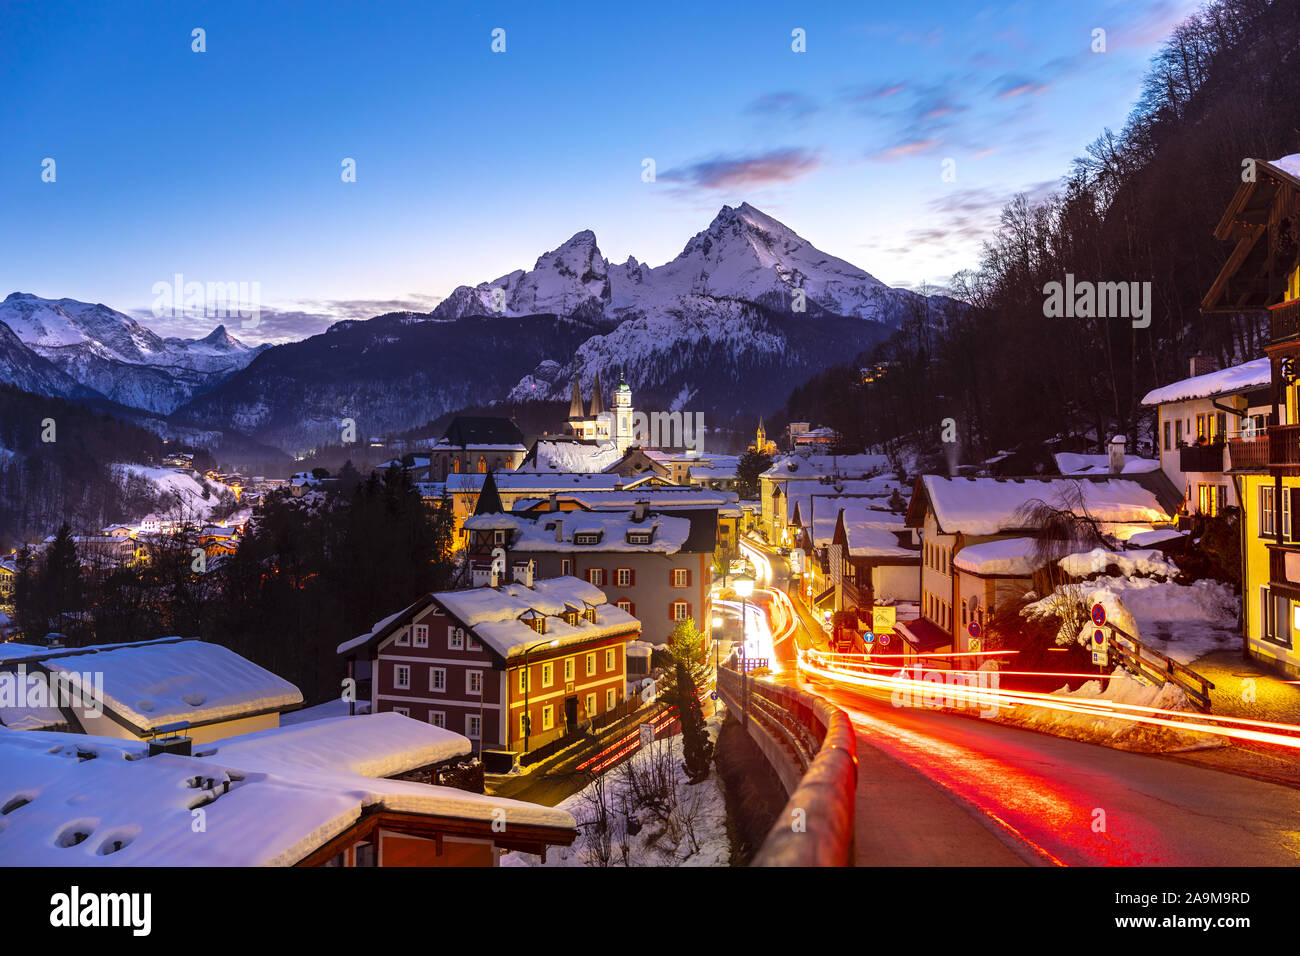 Historic town of Berchtesgaden with famous Watzmann mountain in the background, National park Berchtesgadener, Upper Bavaria, Germany Stock Photo